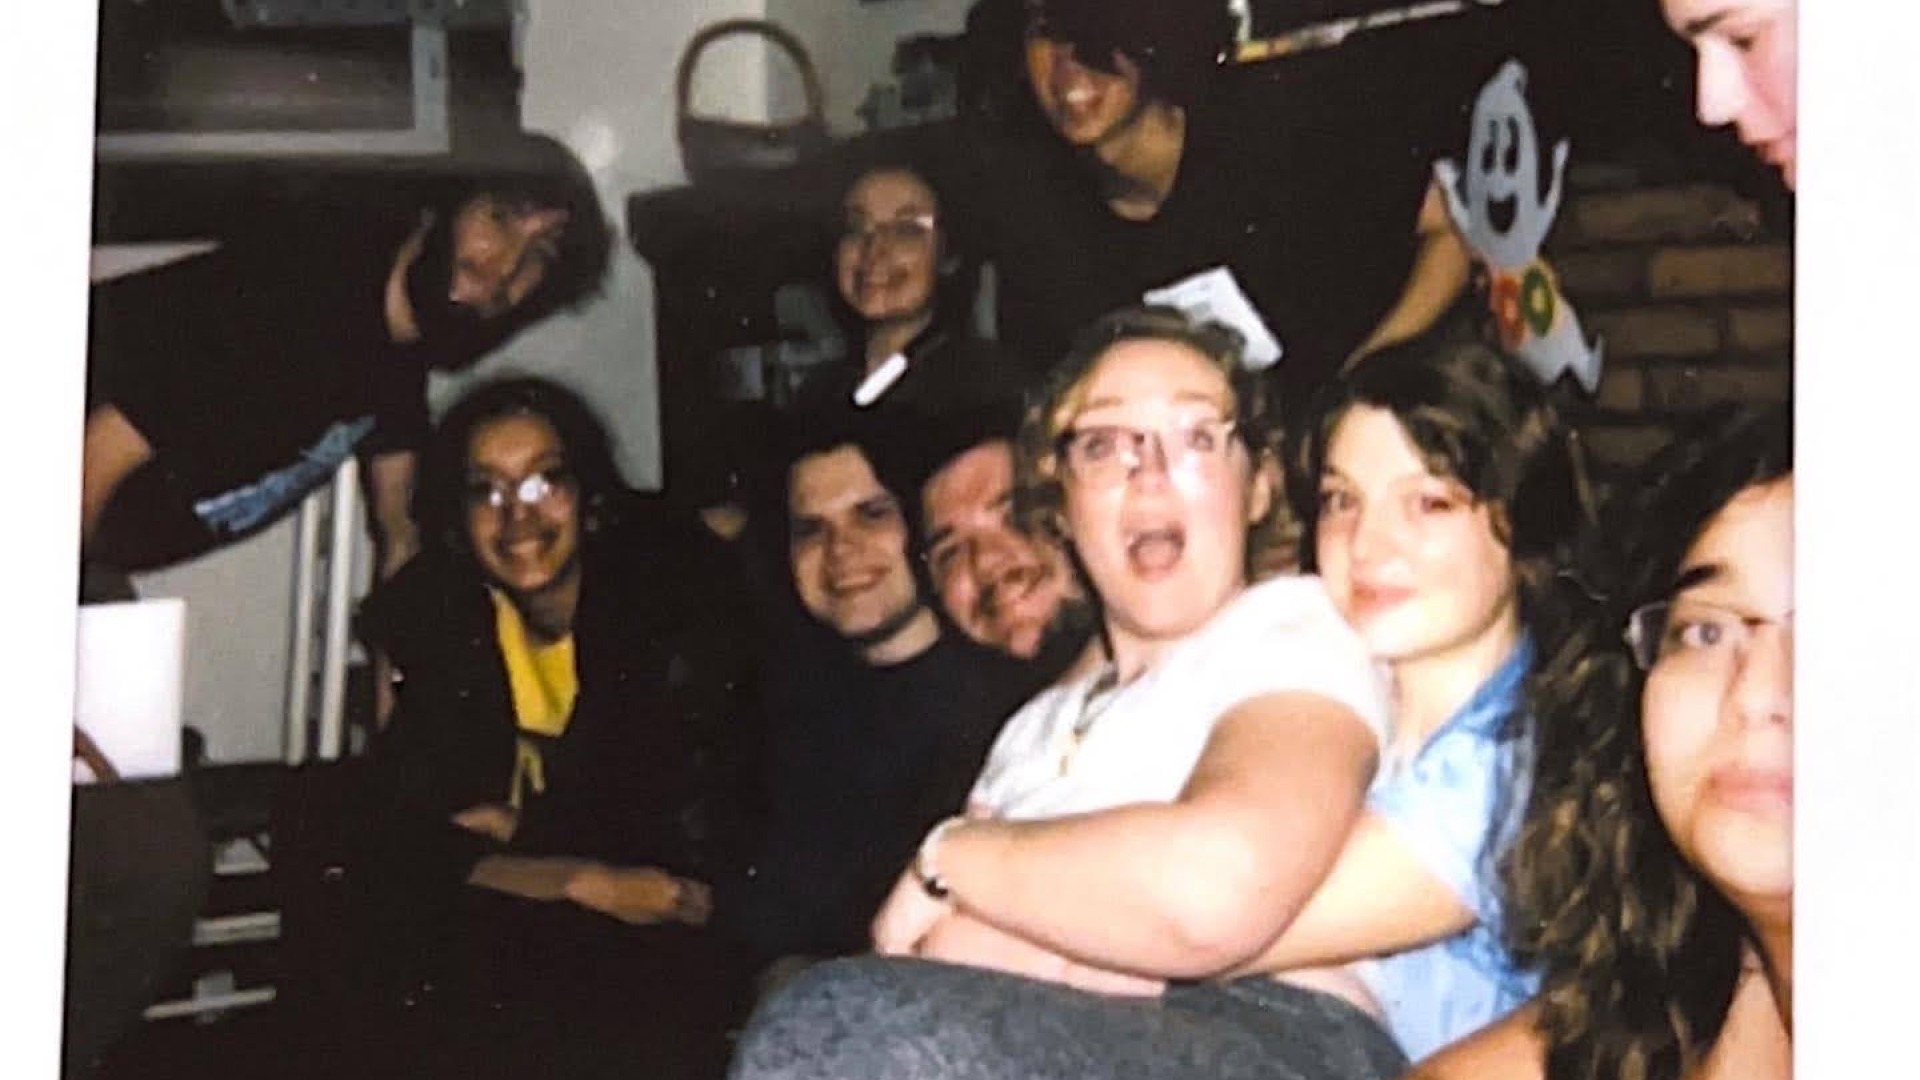 My friend is hugging me tightly in the photo and I'm surprised in a good way